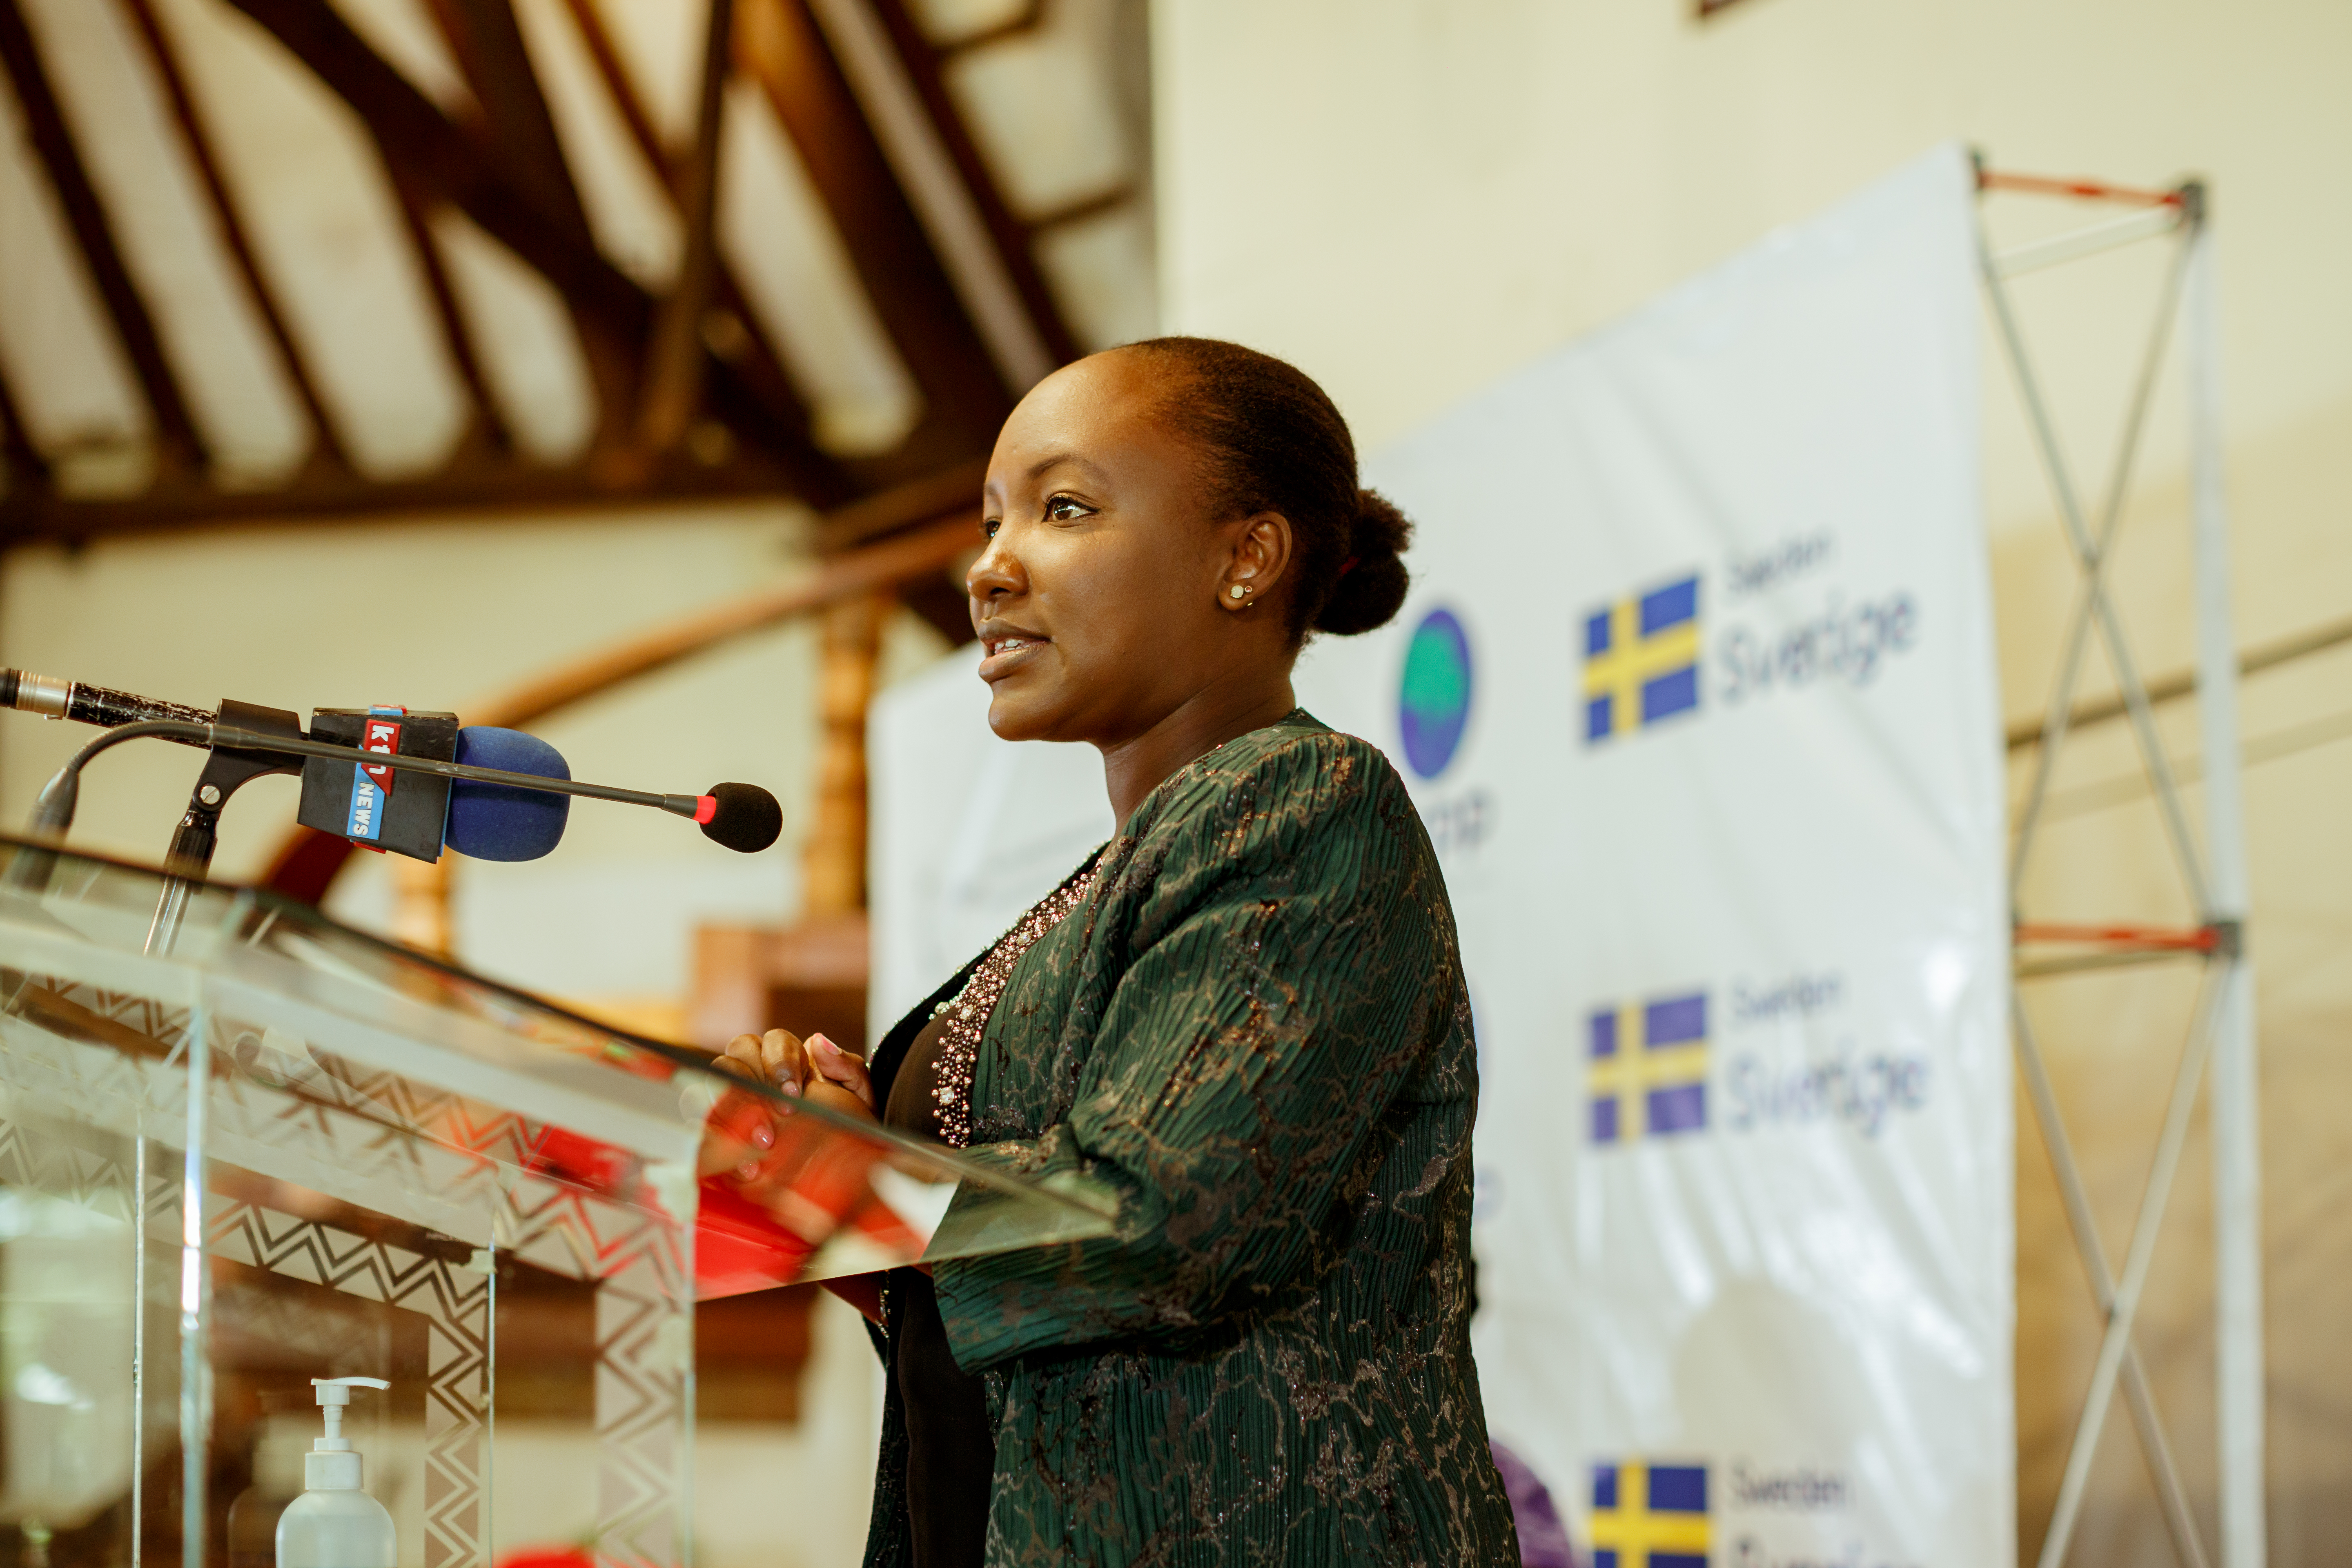  Deputy Governor H.E Majala Mlagui, of Taita Taveta  County in Kenya, delivers the keynote speech during the launch of the Regional Intergenerational Mentorship Programme